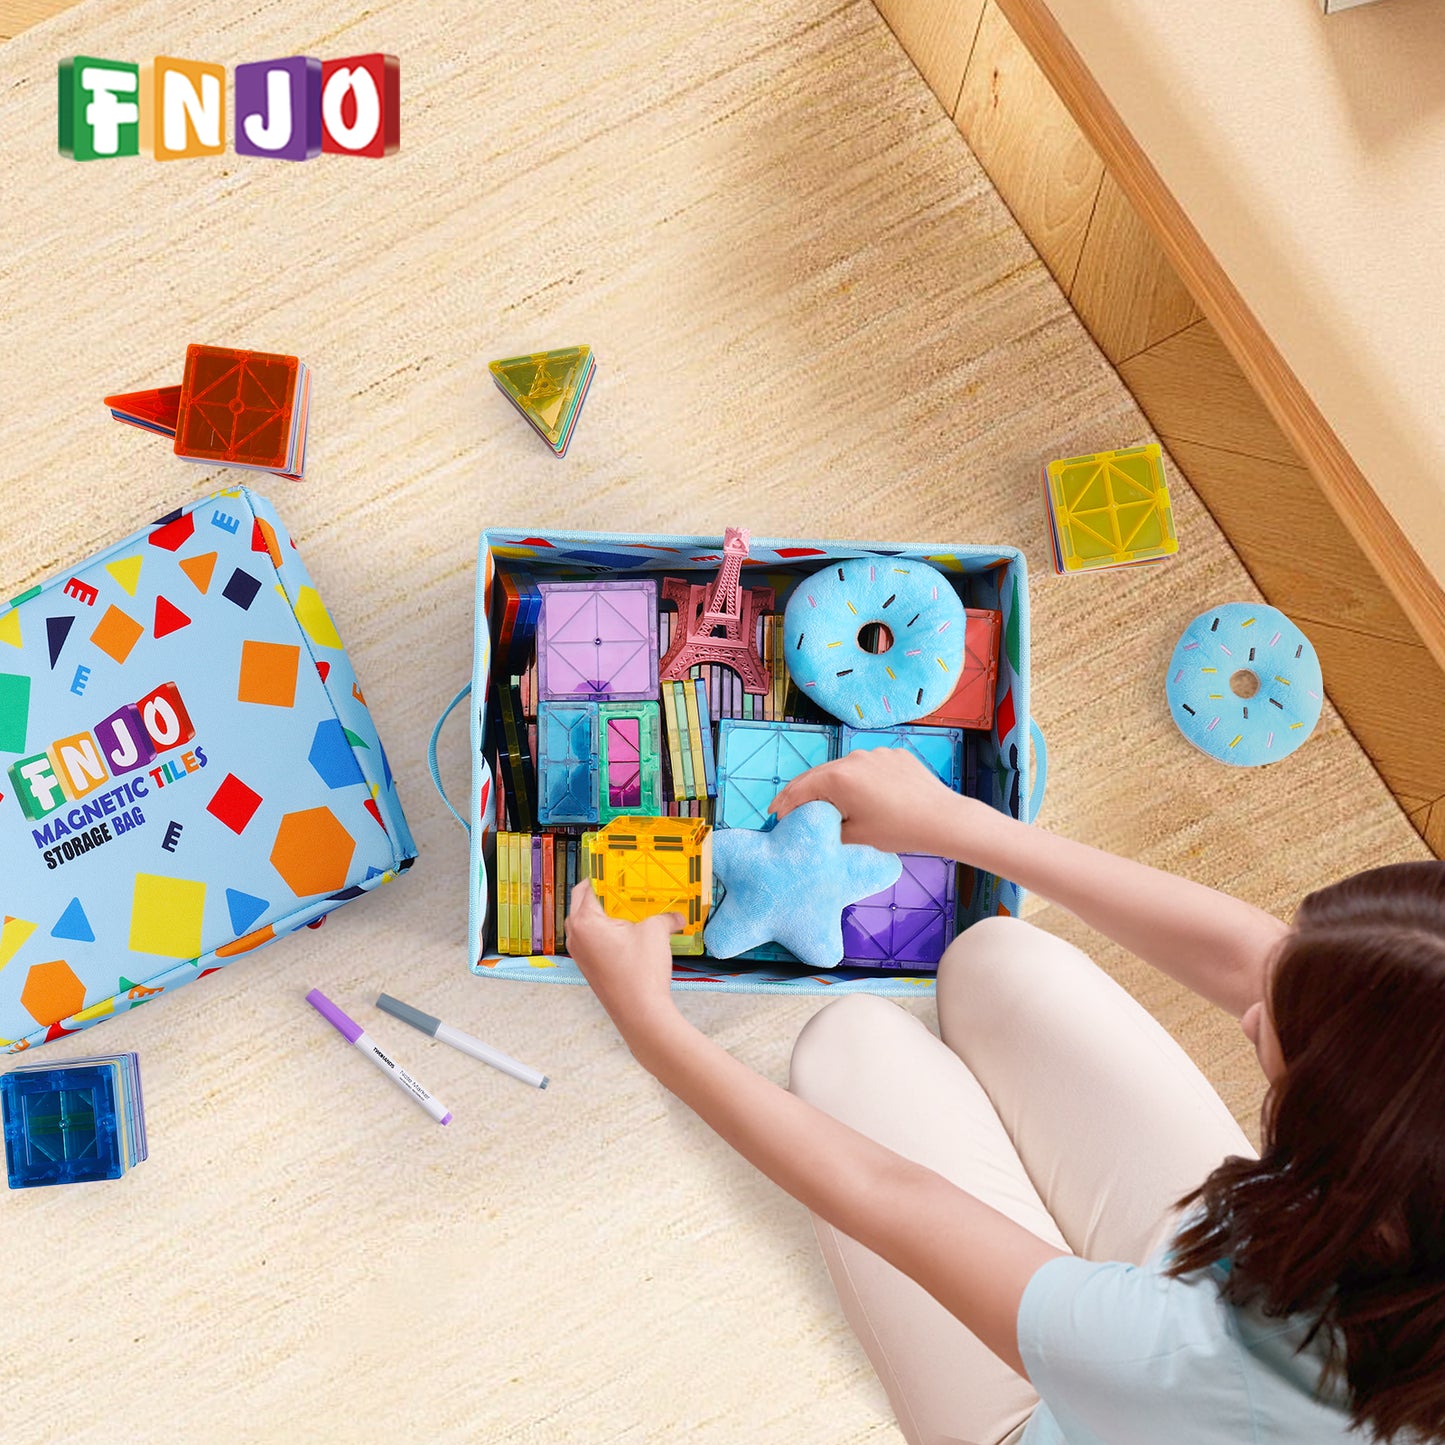 Toy Storage Bin,Foldable Toy Organizer with Lid, Playroom Organizer,Toy Holder,Storage Box for Magnetic Tiles,Play Figure